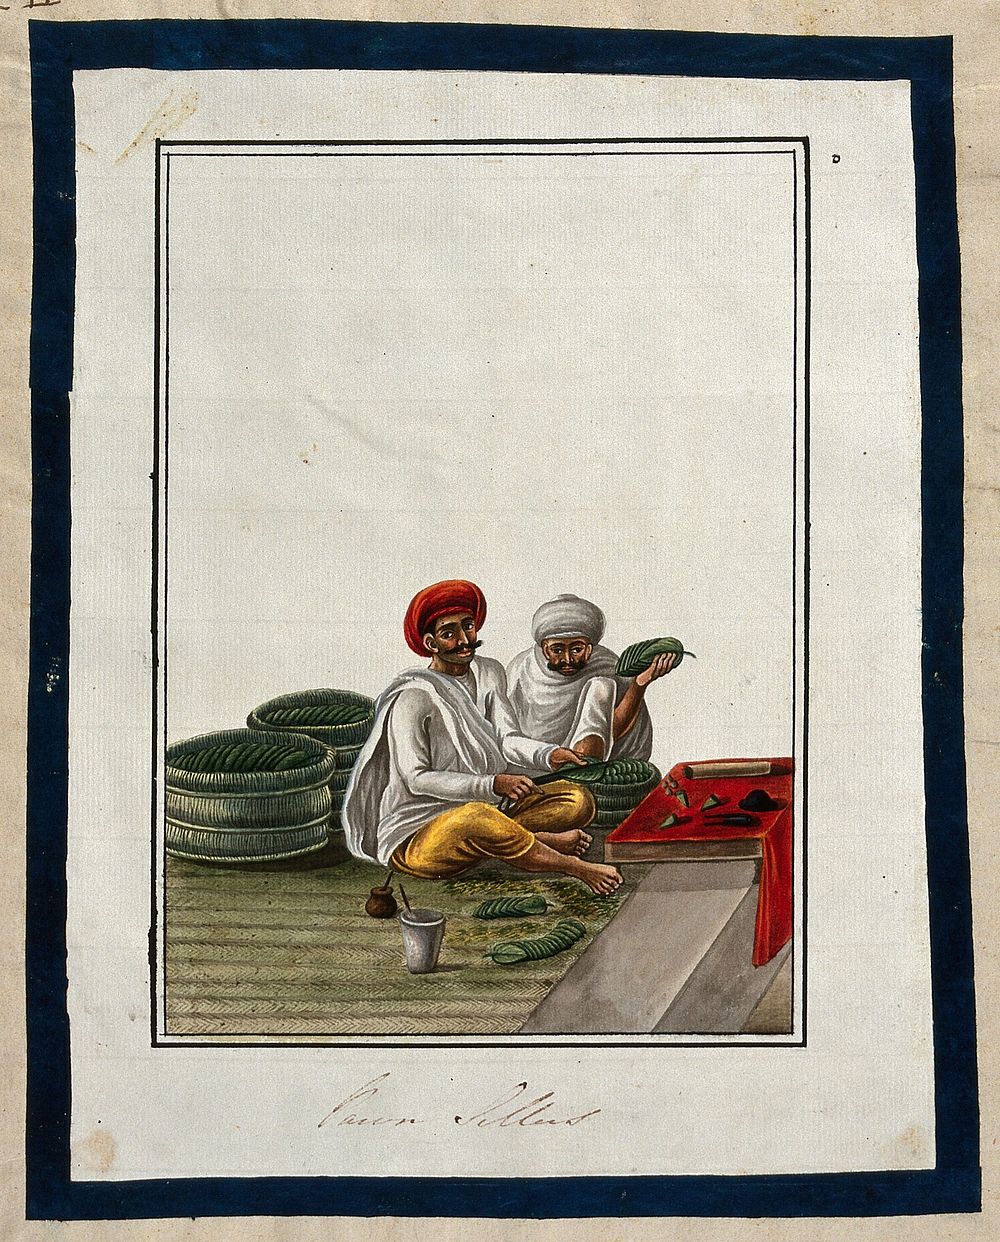 Two men selling pan (betel leaves). Gouache painting by an Indian artist.